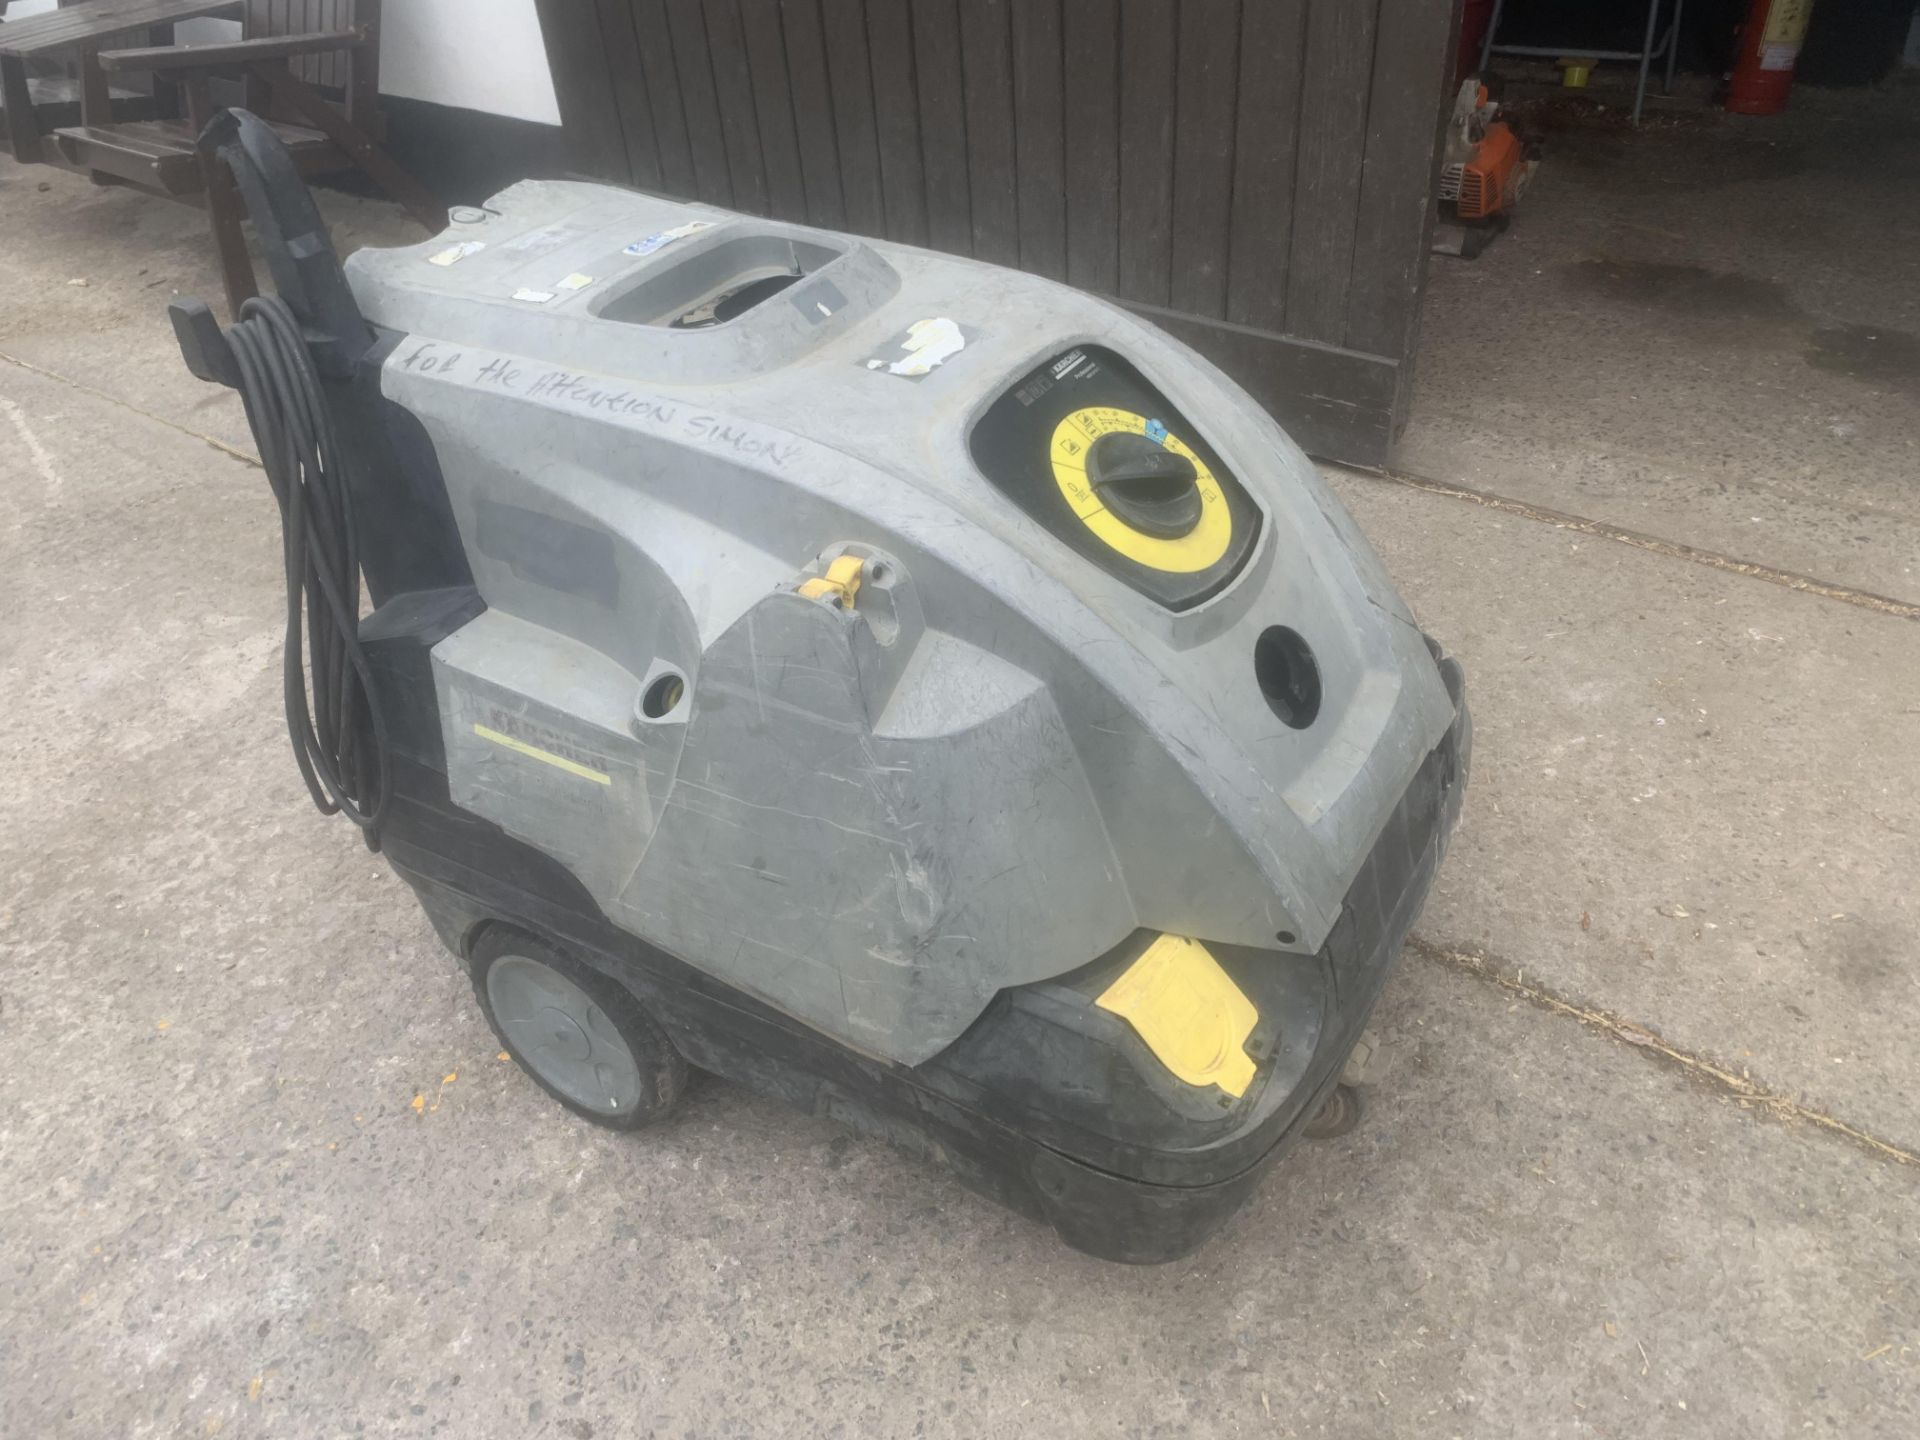 KARCHER PROFEESIONAL HOT AND COLD DIESEL POWER WASHER.LOCATION N IRELAND. - Image 4 of 7